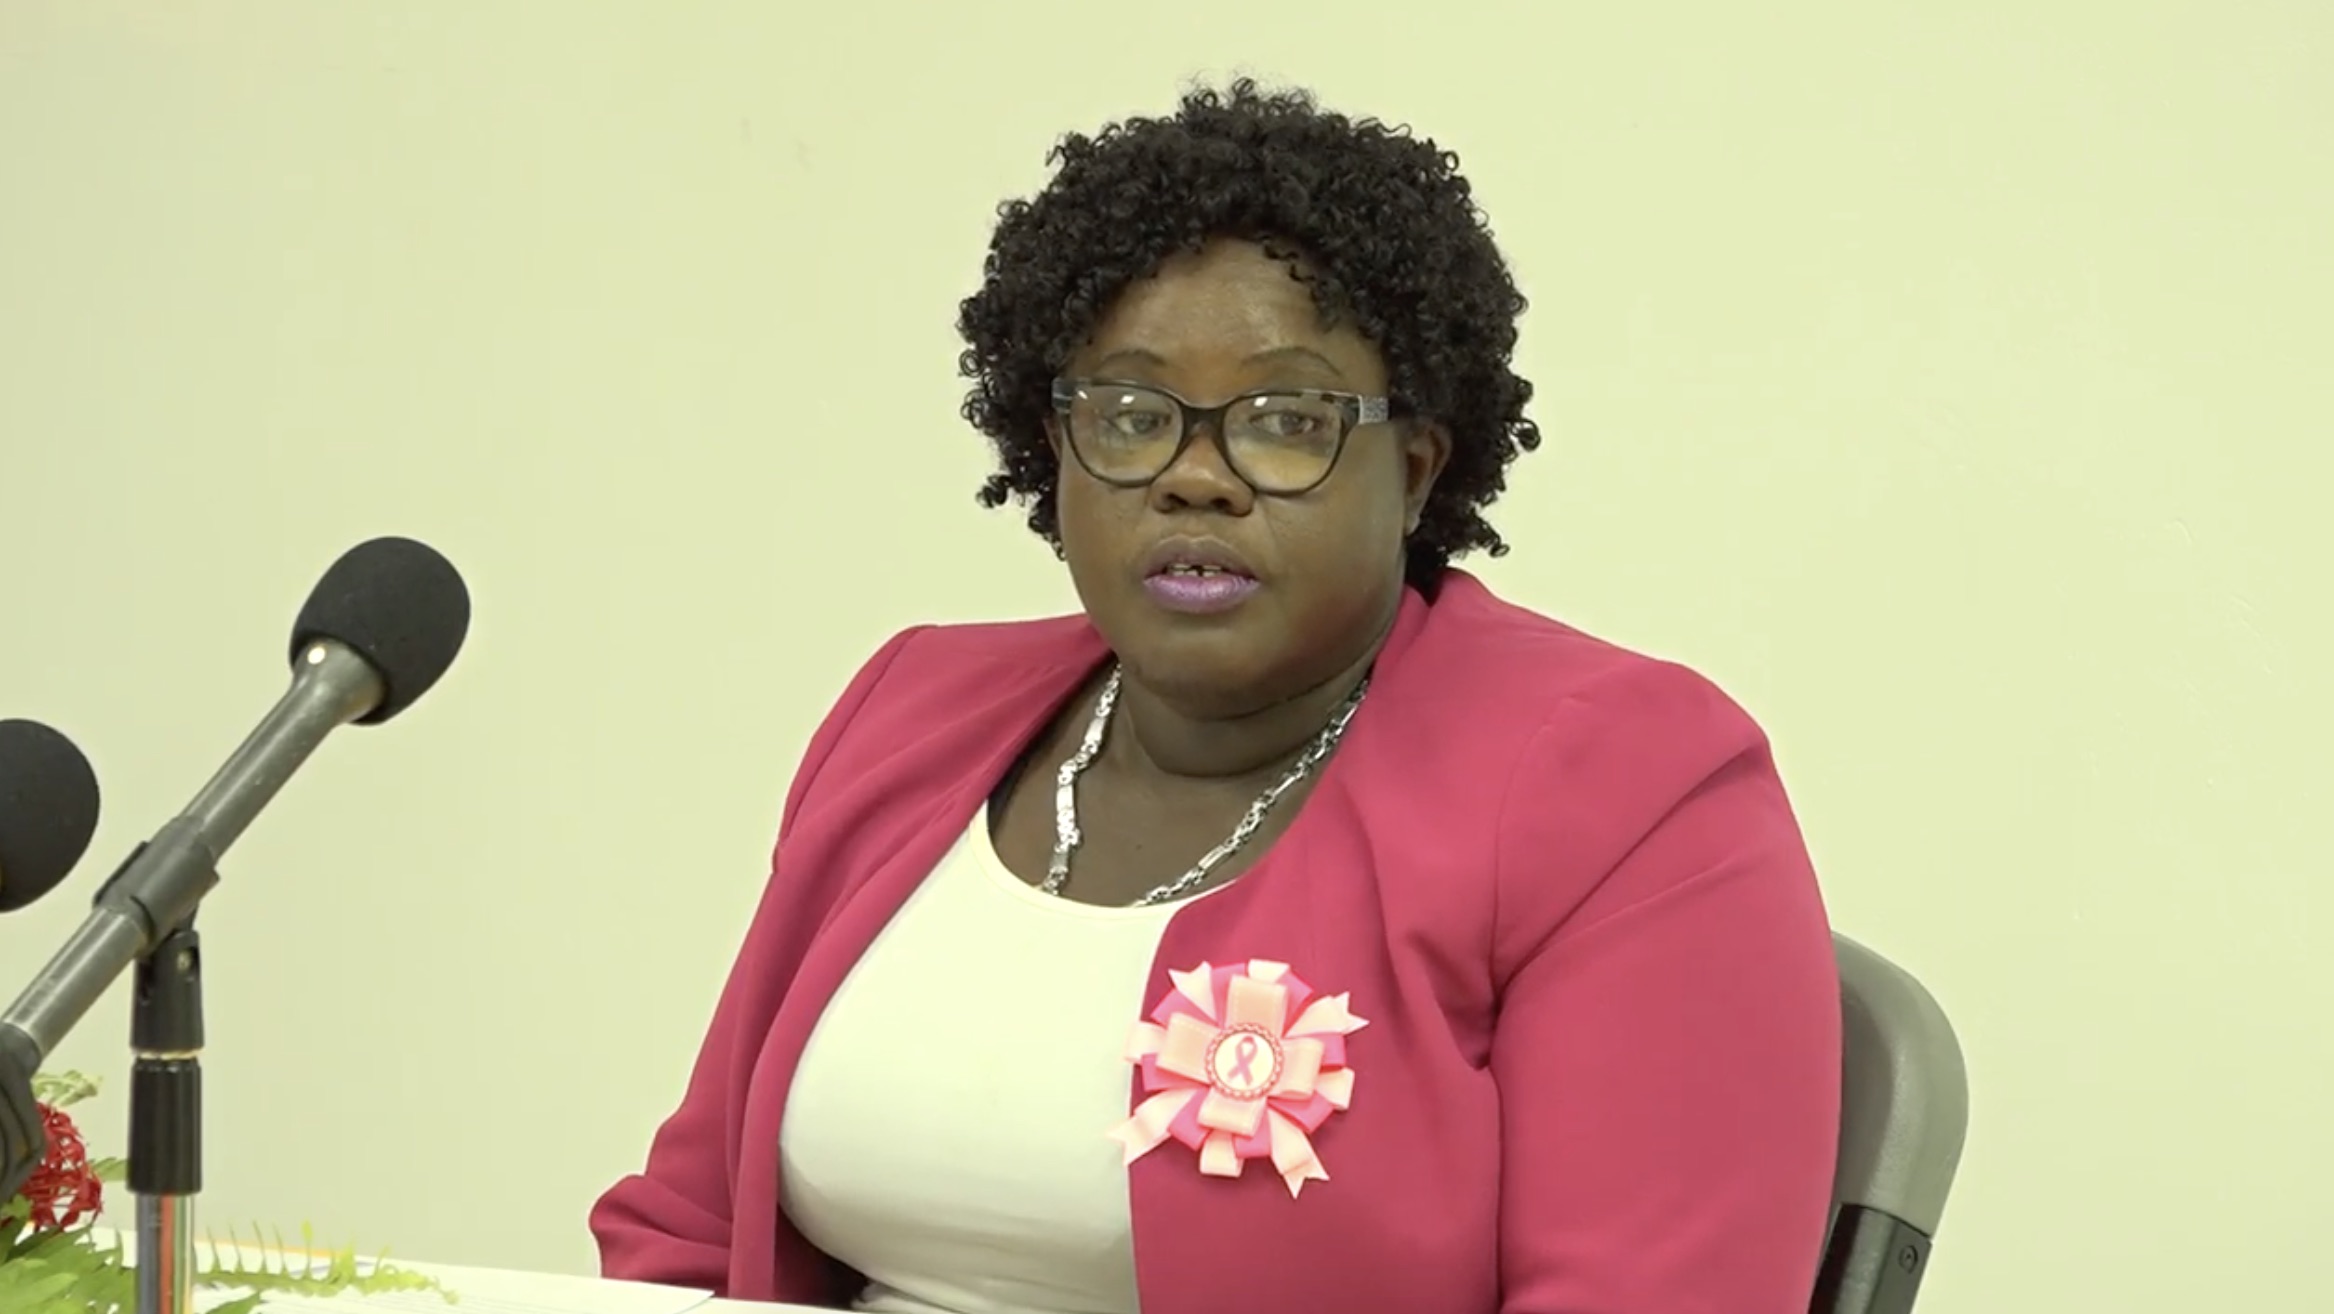 Hon. Hazel Brandy-Williams, Junior Minister of Health and Gender Affairs, delivering remarks at the opening ceremony for the Small Business Boot Camp hosted by the Ministry of Health and Gender Affairs in the Nevis Island Administration at the GMBC Building in Charlestown on October 19, 2020